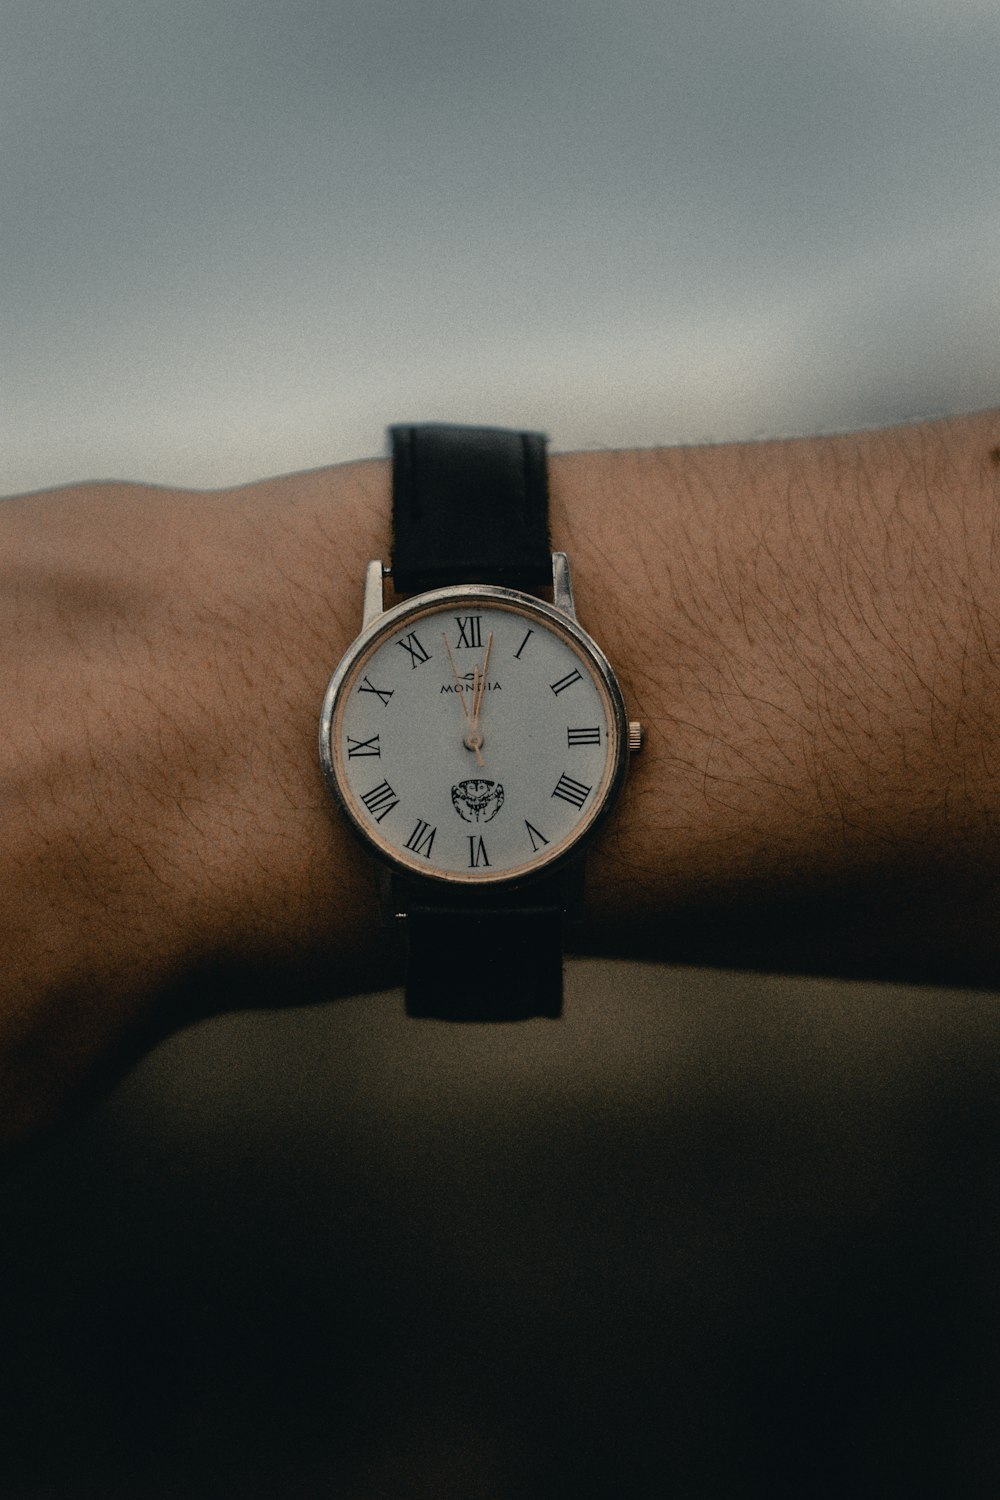 round white and silver-colored analog watch